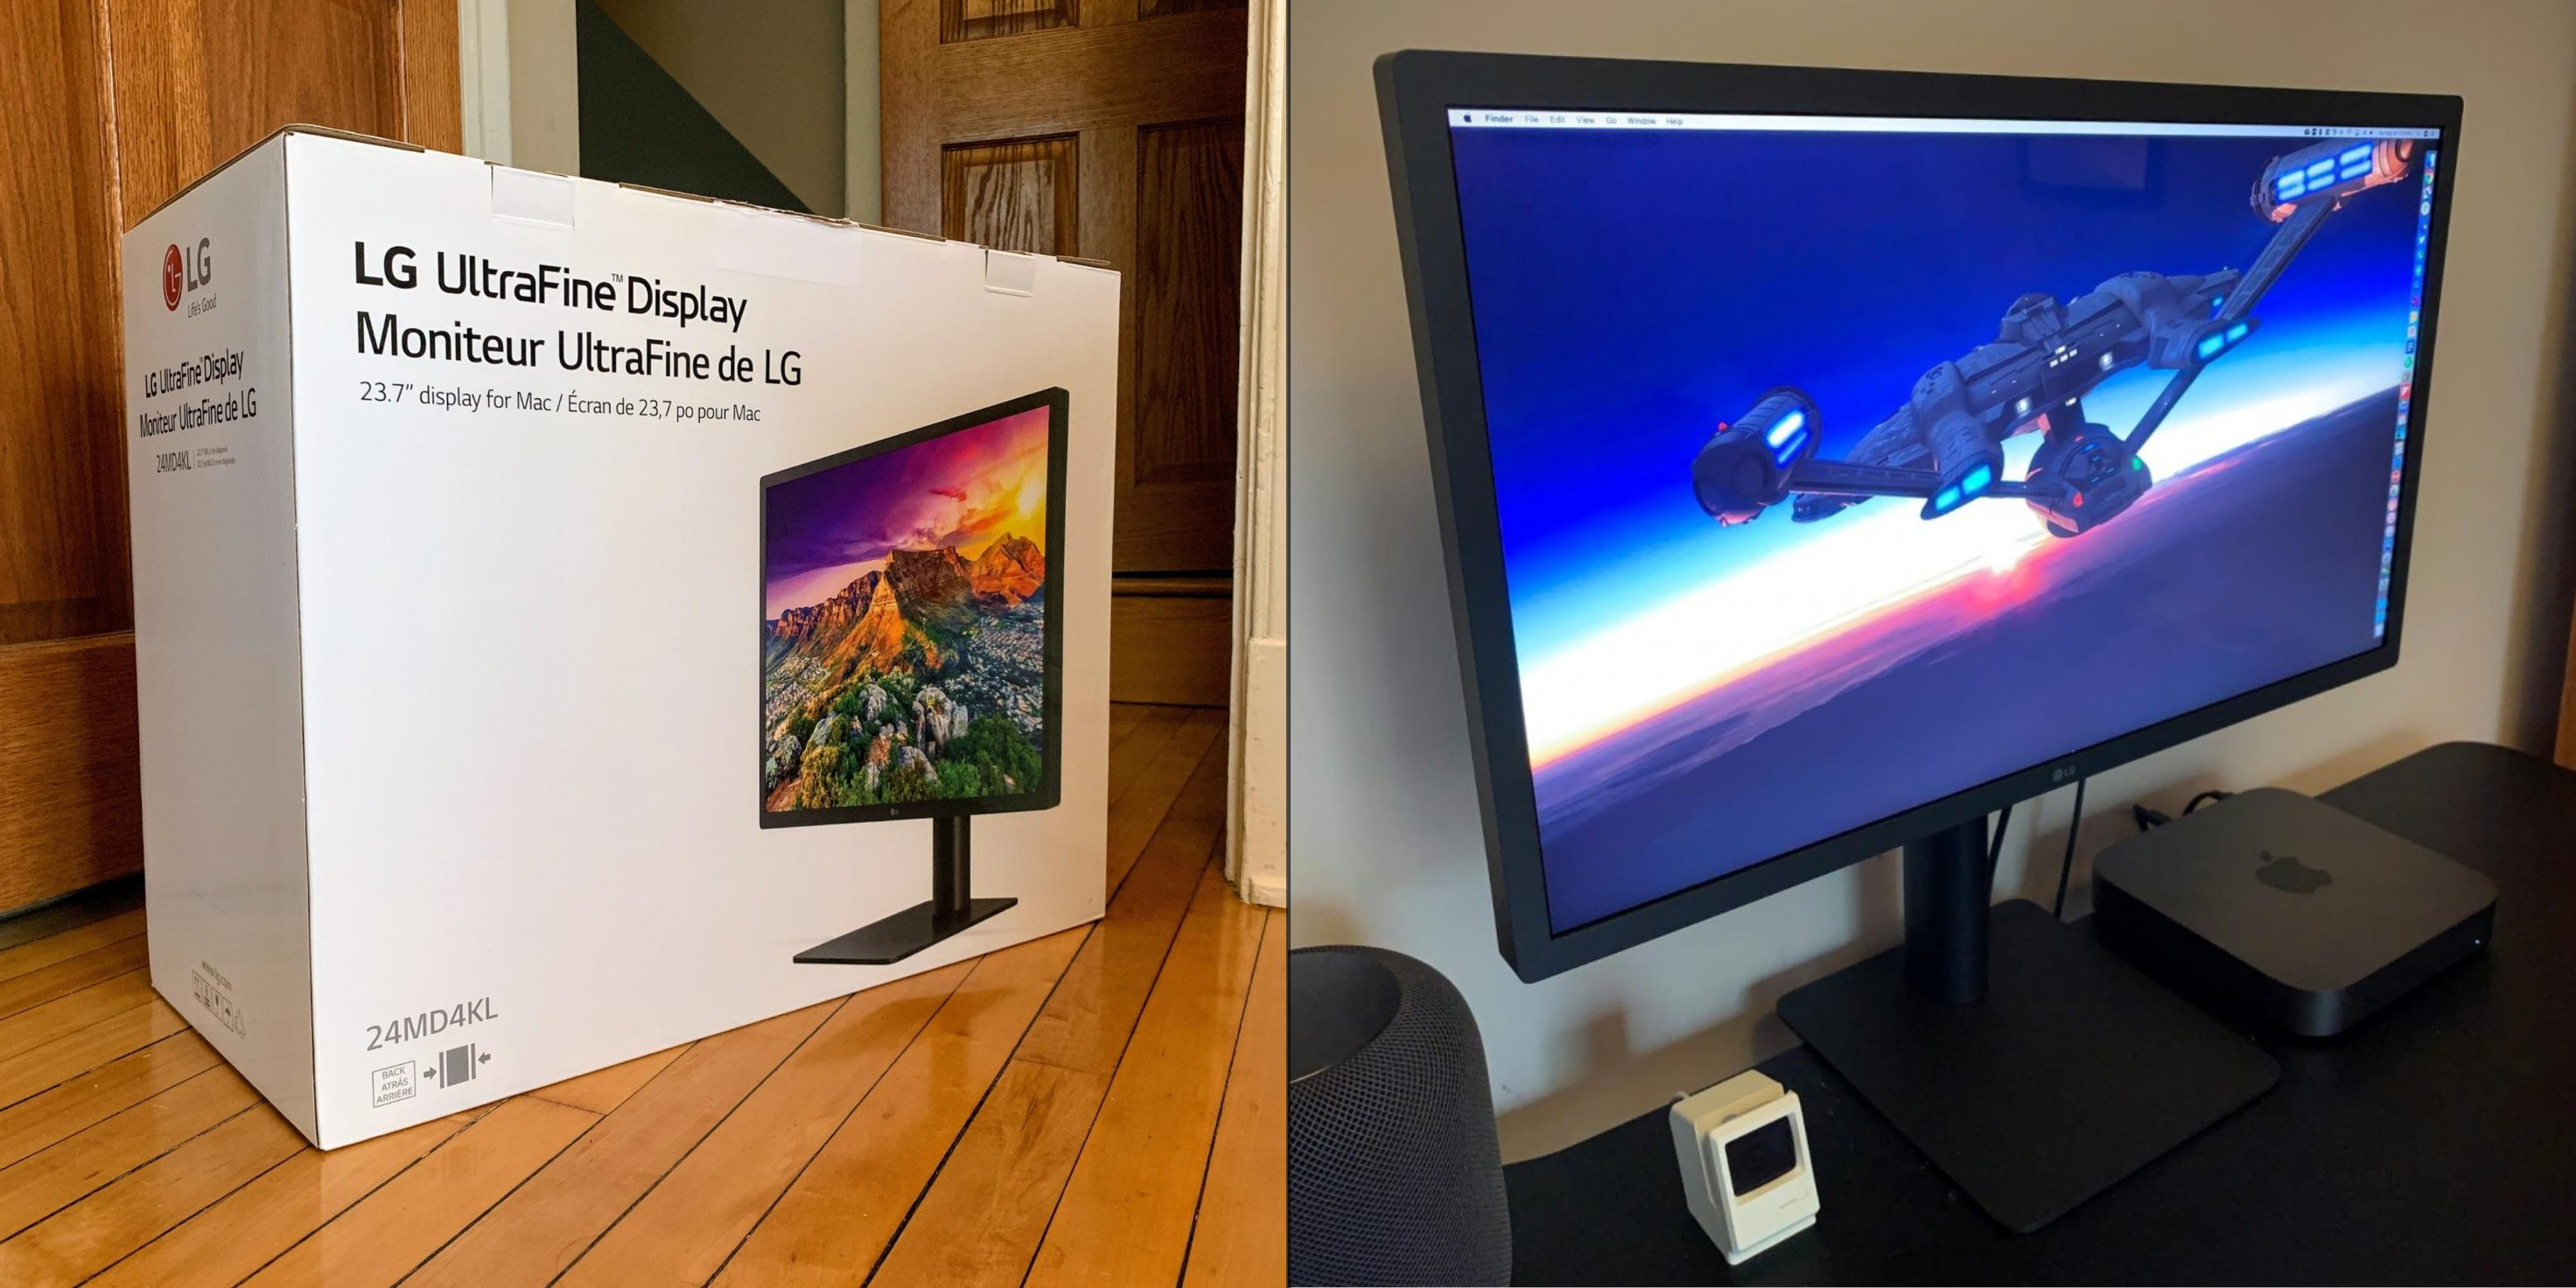 Apple Stores are quietly selling a 23.7-inch LG UltraFine display